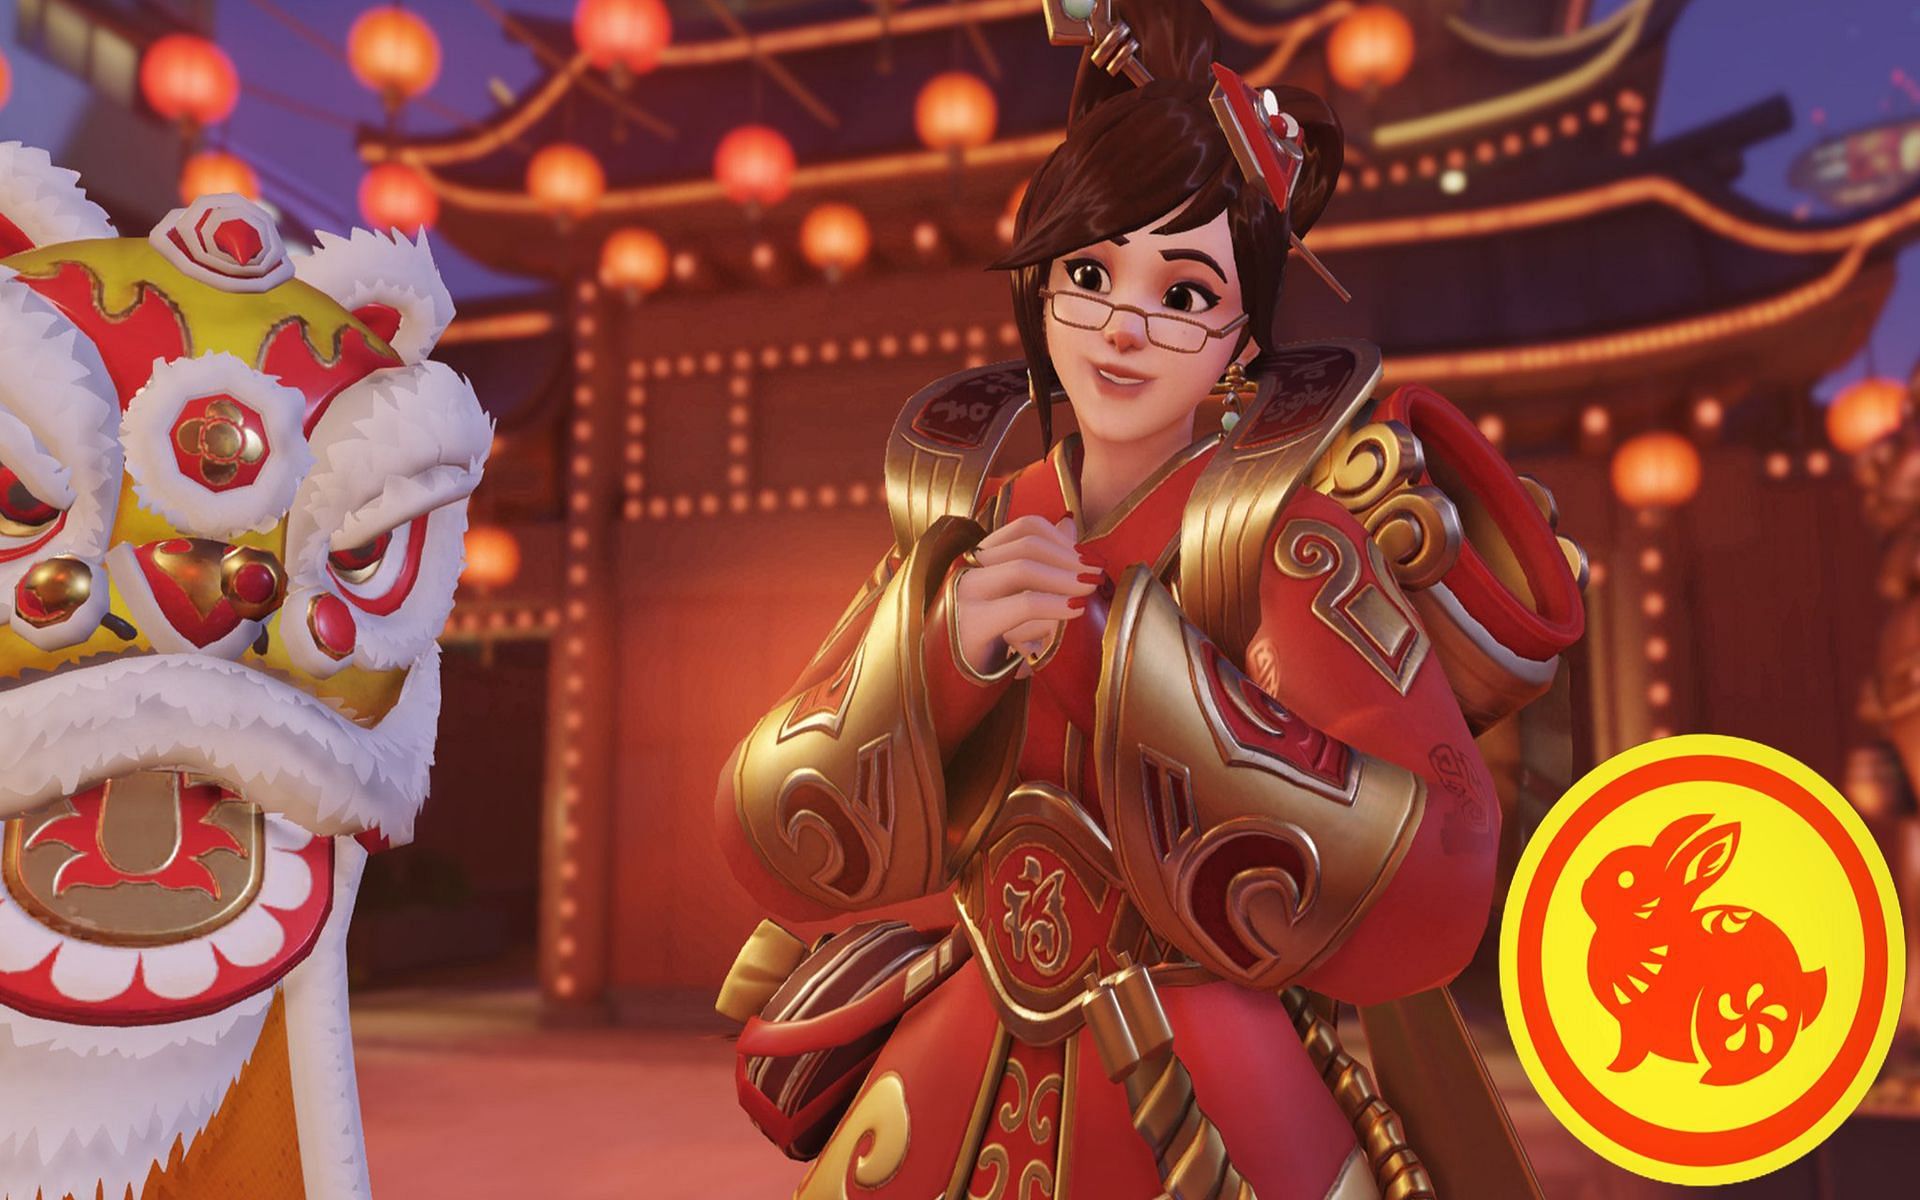 Overwatch 2 Lunar New Year 2023 possibilities of new game modes explored (Images via Blizzard Entertainment)